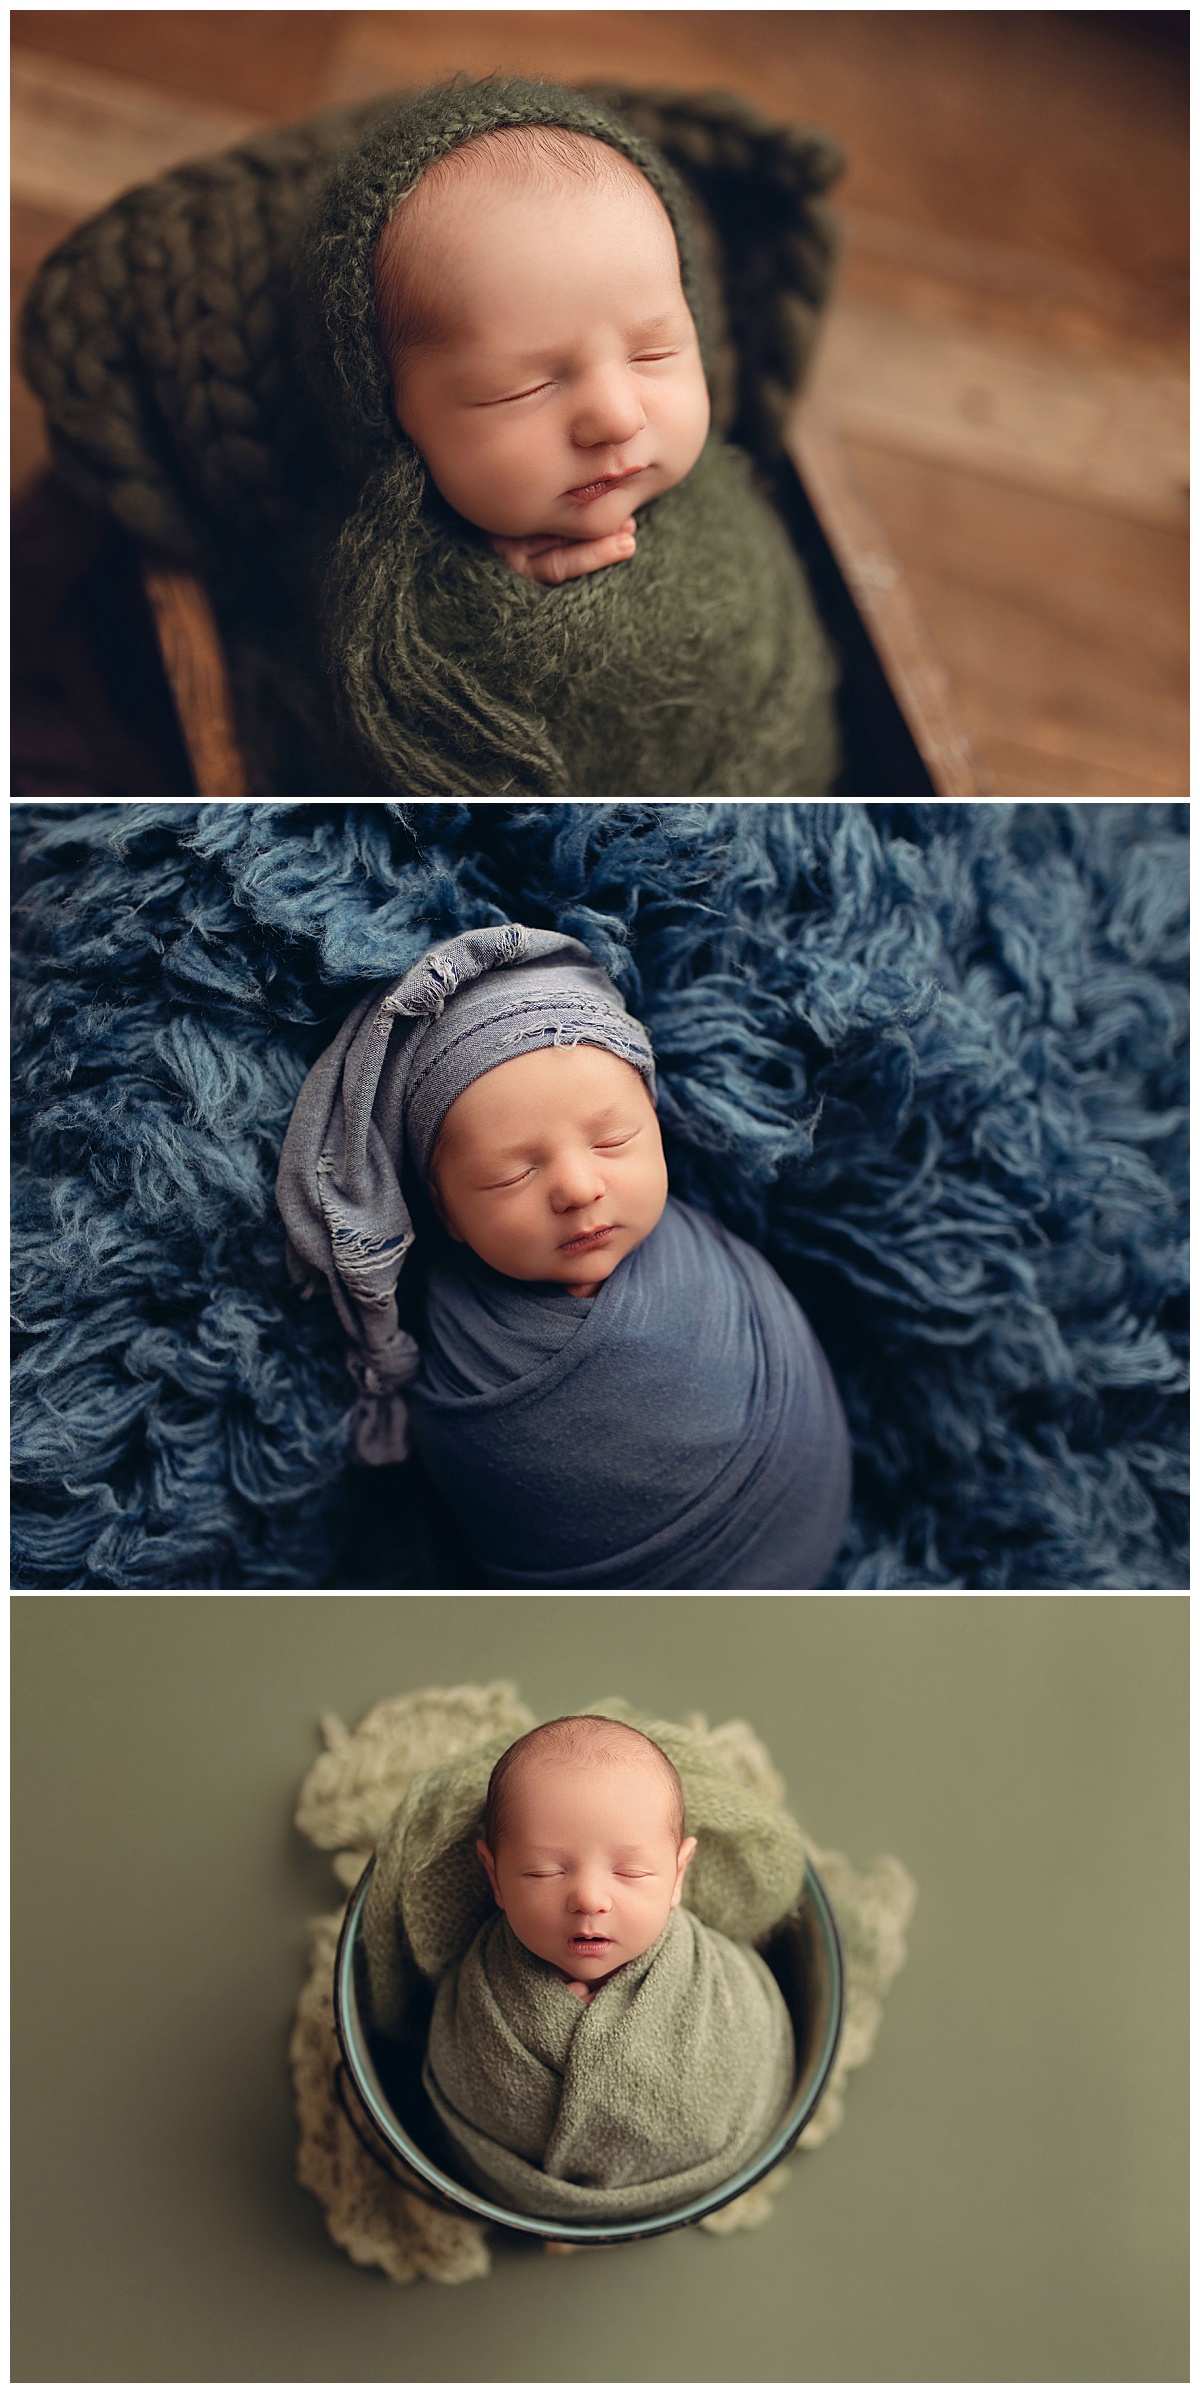 infant swaddled in blue and green by Charlottesville Photographer